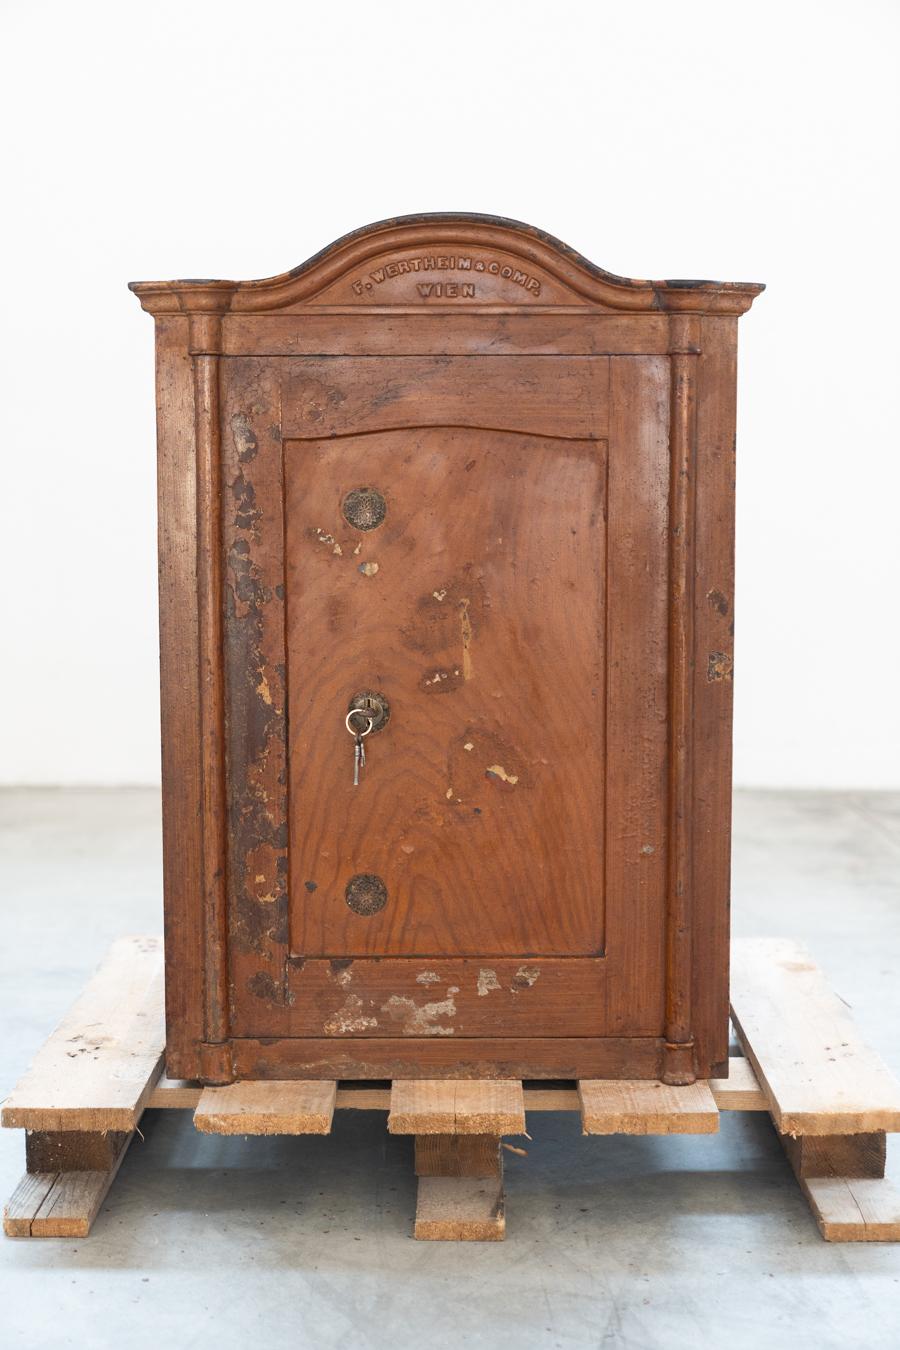 Austro-Hungarian period safe F. WERTHEIM & C. with key, 1800s
Style
Vintage
Periodo del design
Before 1890s
Production Period
Before 1890s
Year Manufactured
1800
Maker
Wertheim & C.
More information on the article
one side is missing a piece of